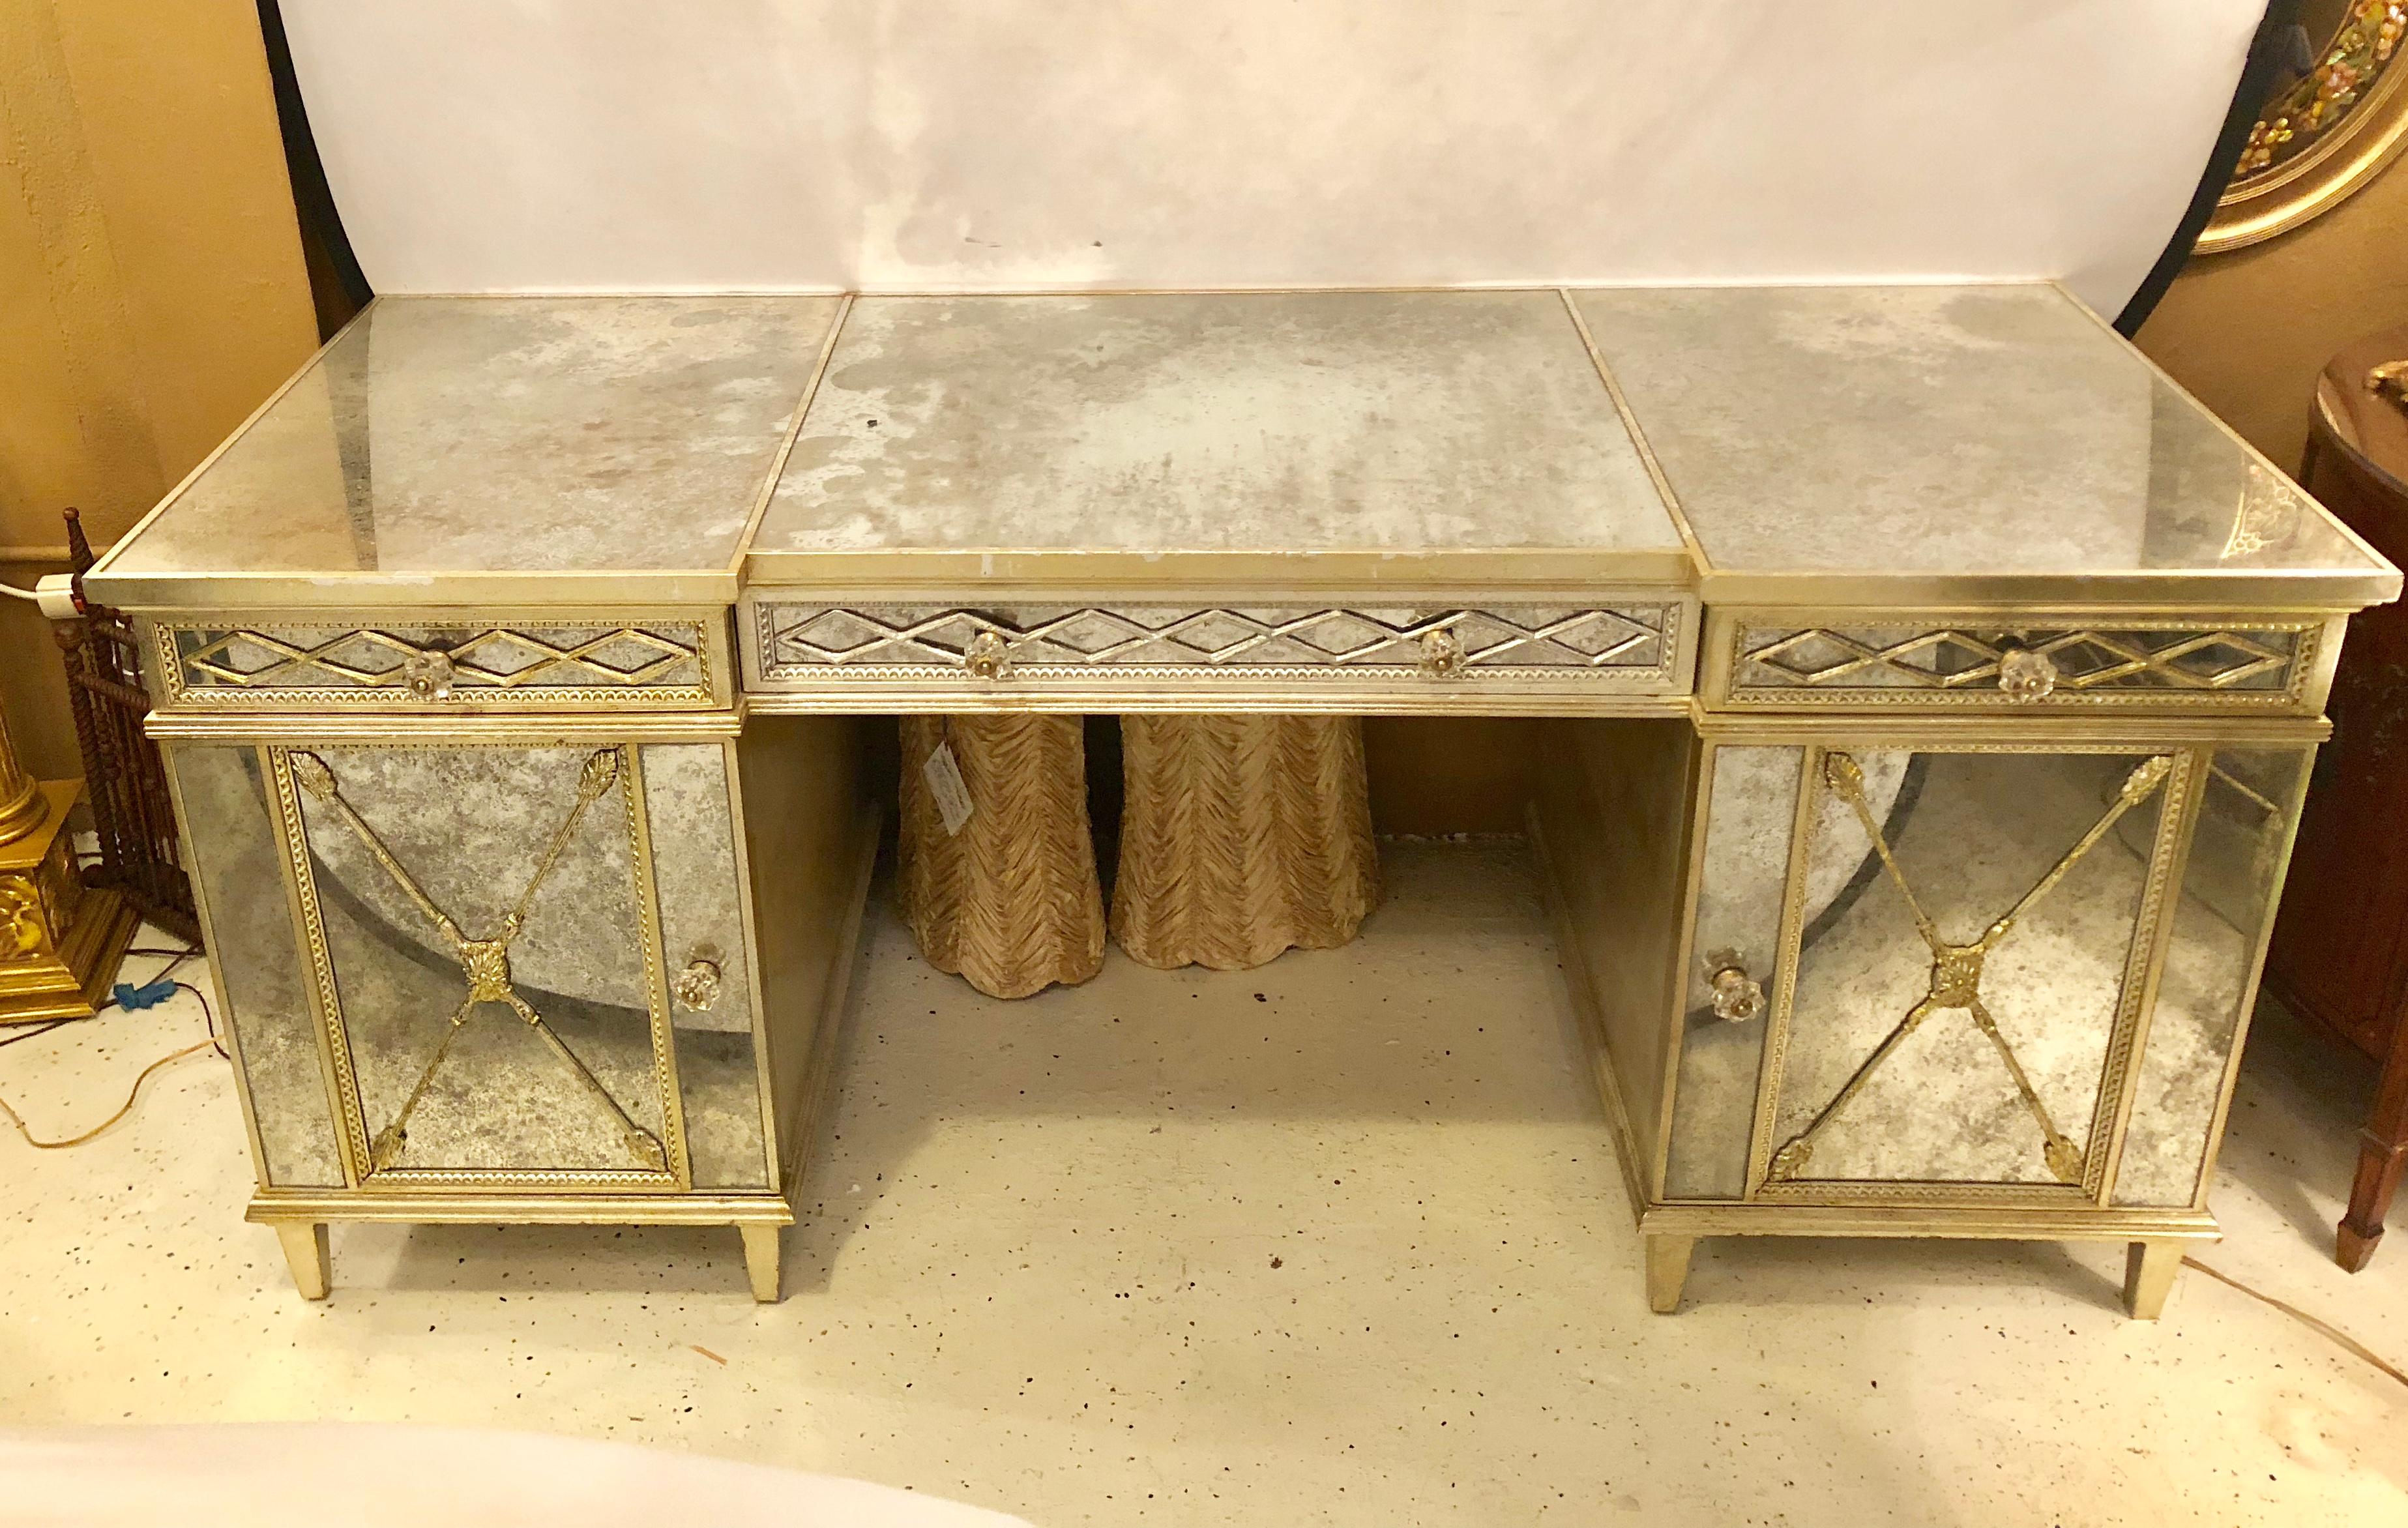 Silver gilt triple vanity with antique mirror paneling and closed arrow design. This recent palatial desk or vanity is simply stunning and certain to add great reflection to any Hollywood Regency setting. The large and deep centre drawer under a